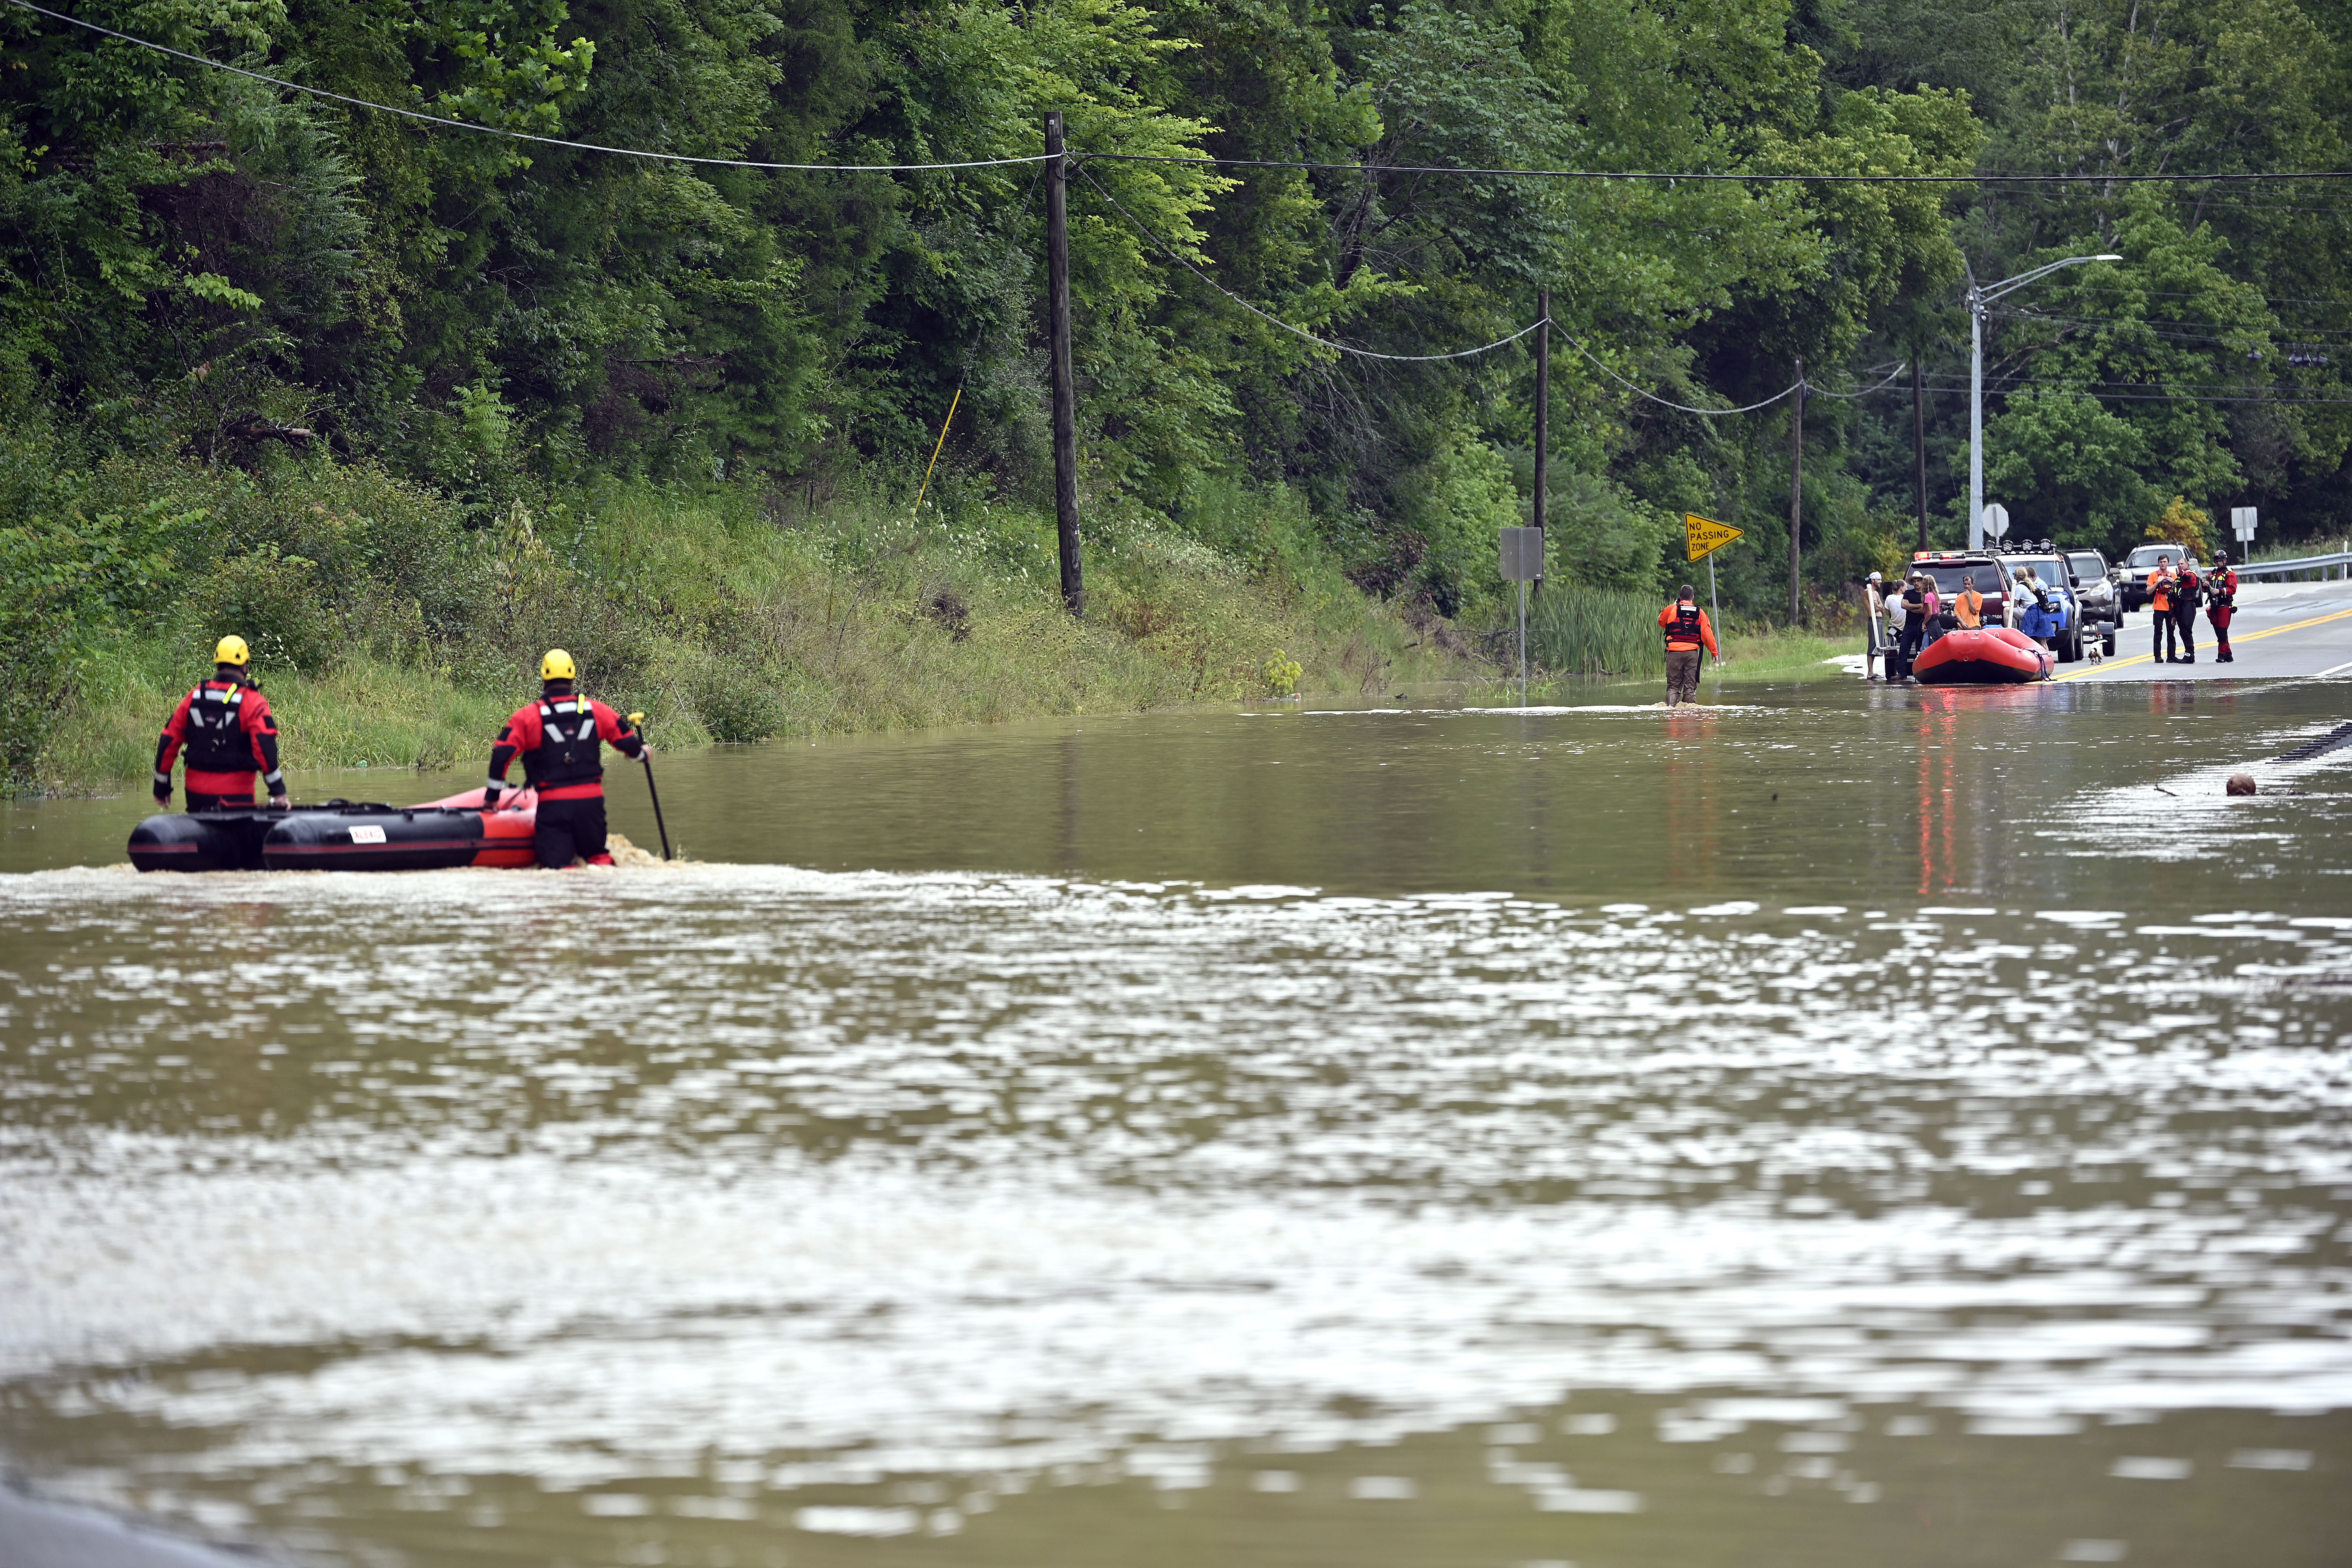 Members of the Winchester, Ky., Fire Department walk inflatable boats across flood waters over Ky. State Road 15 in Jackson, Ky., to pick up people stranded by the floodwaters Thursday, July 28, 2022. (AP Photo/Timothy D. Easley)